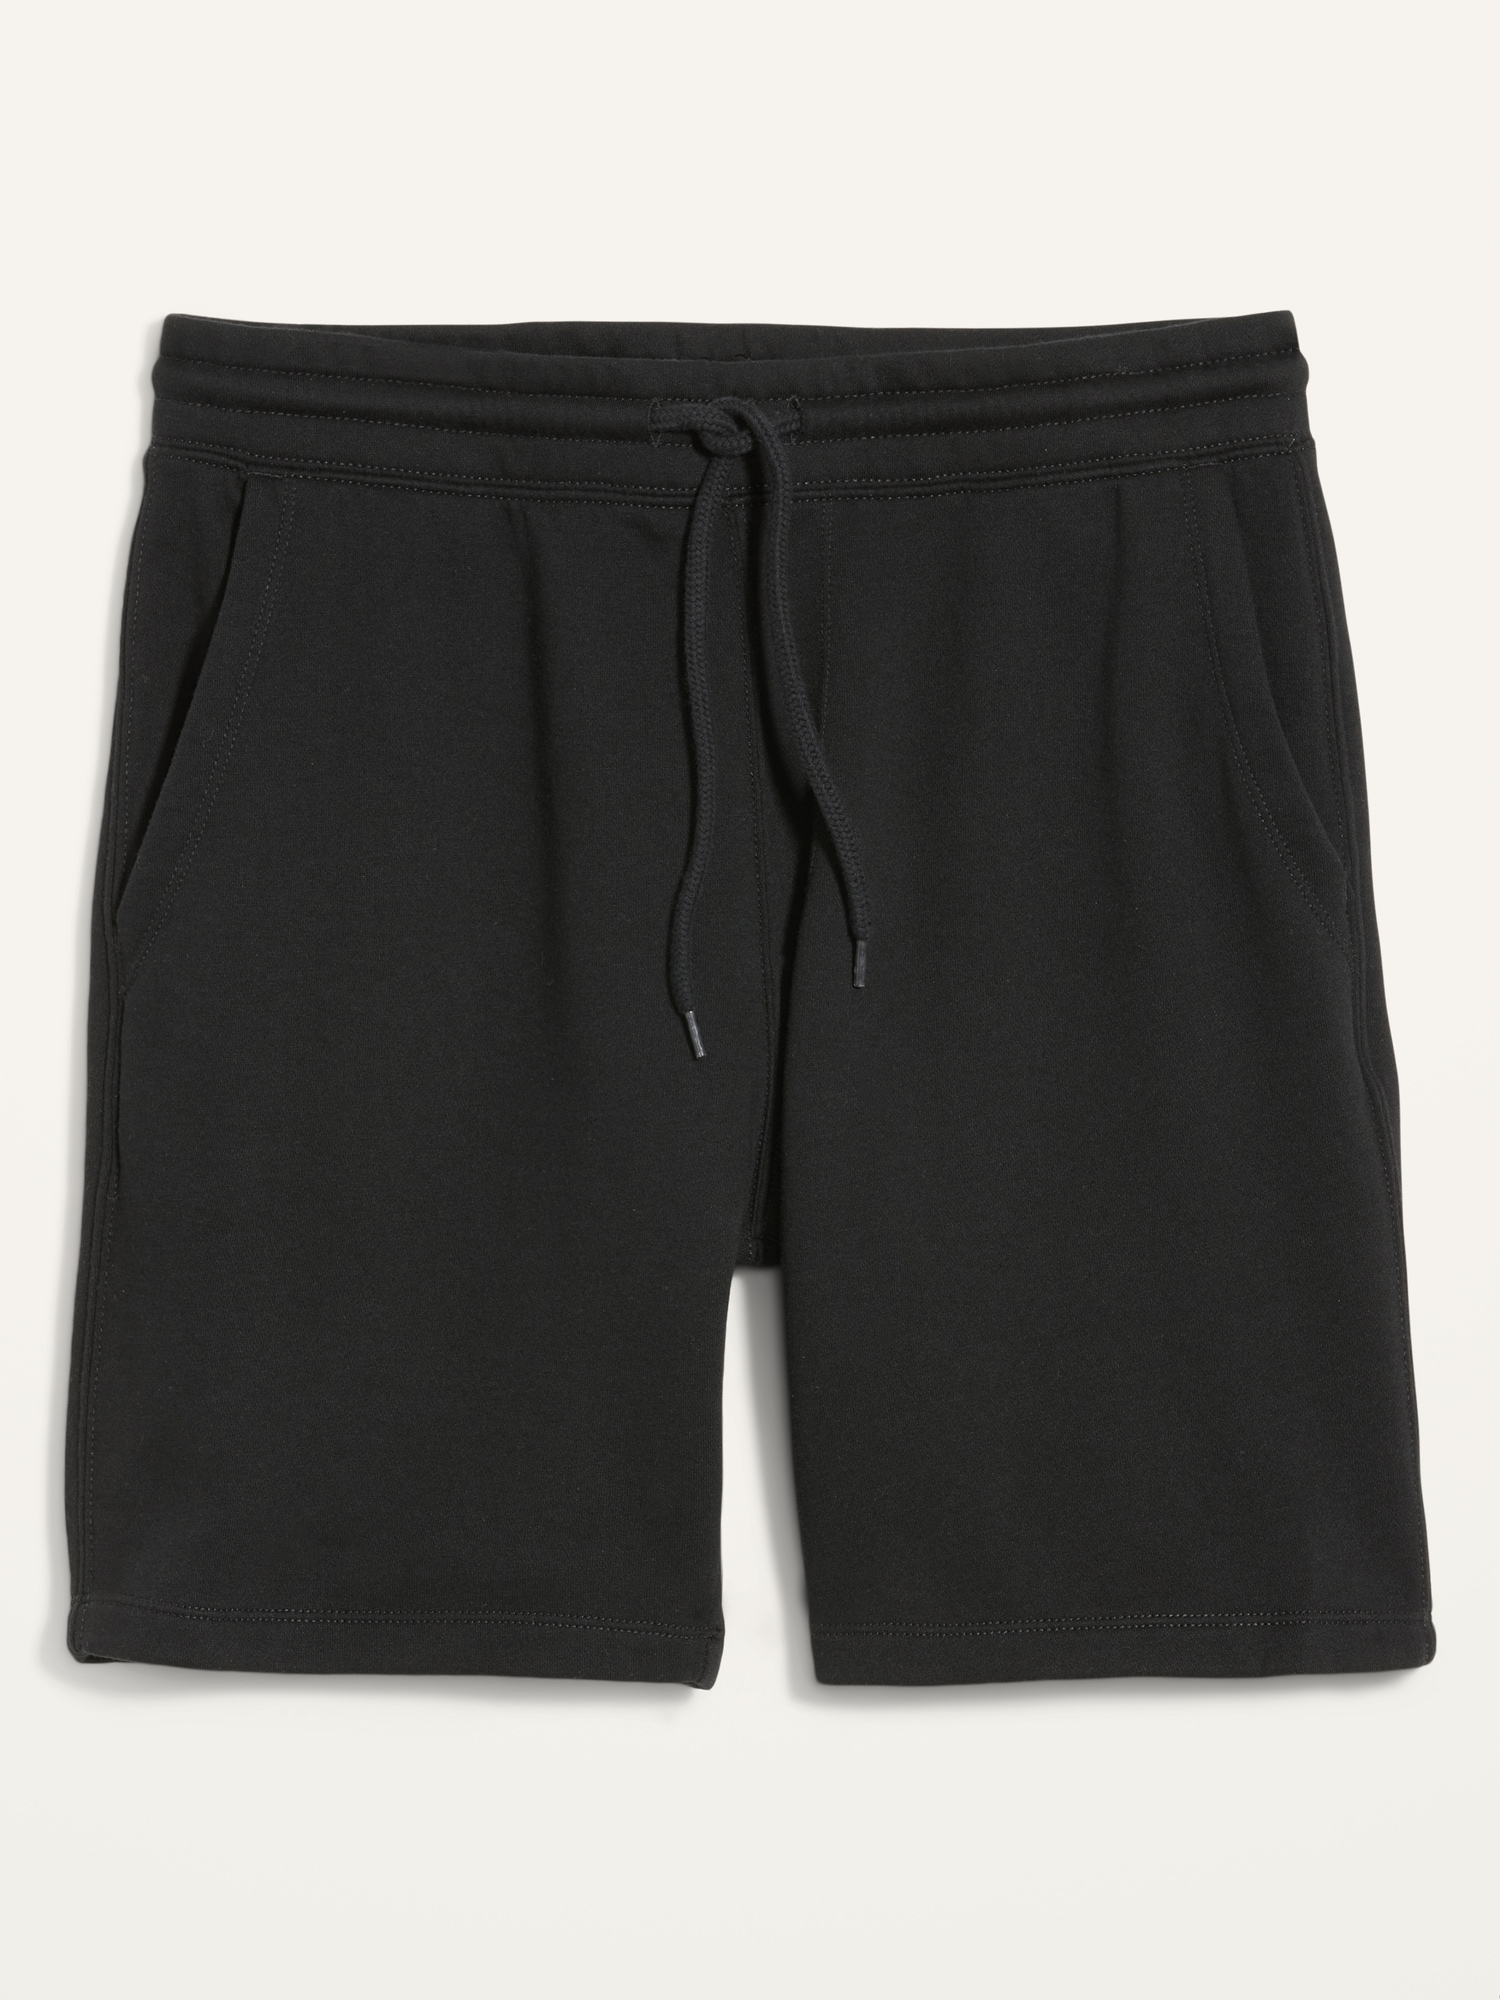 Gender-Neutral Jogger Sweat Shorts for Adults -- 7-inch inseam